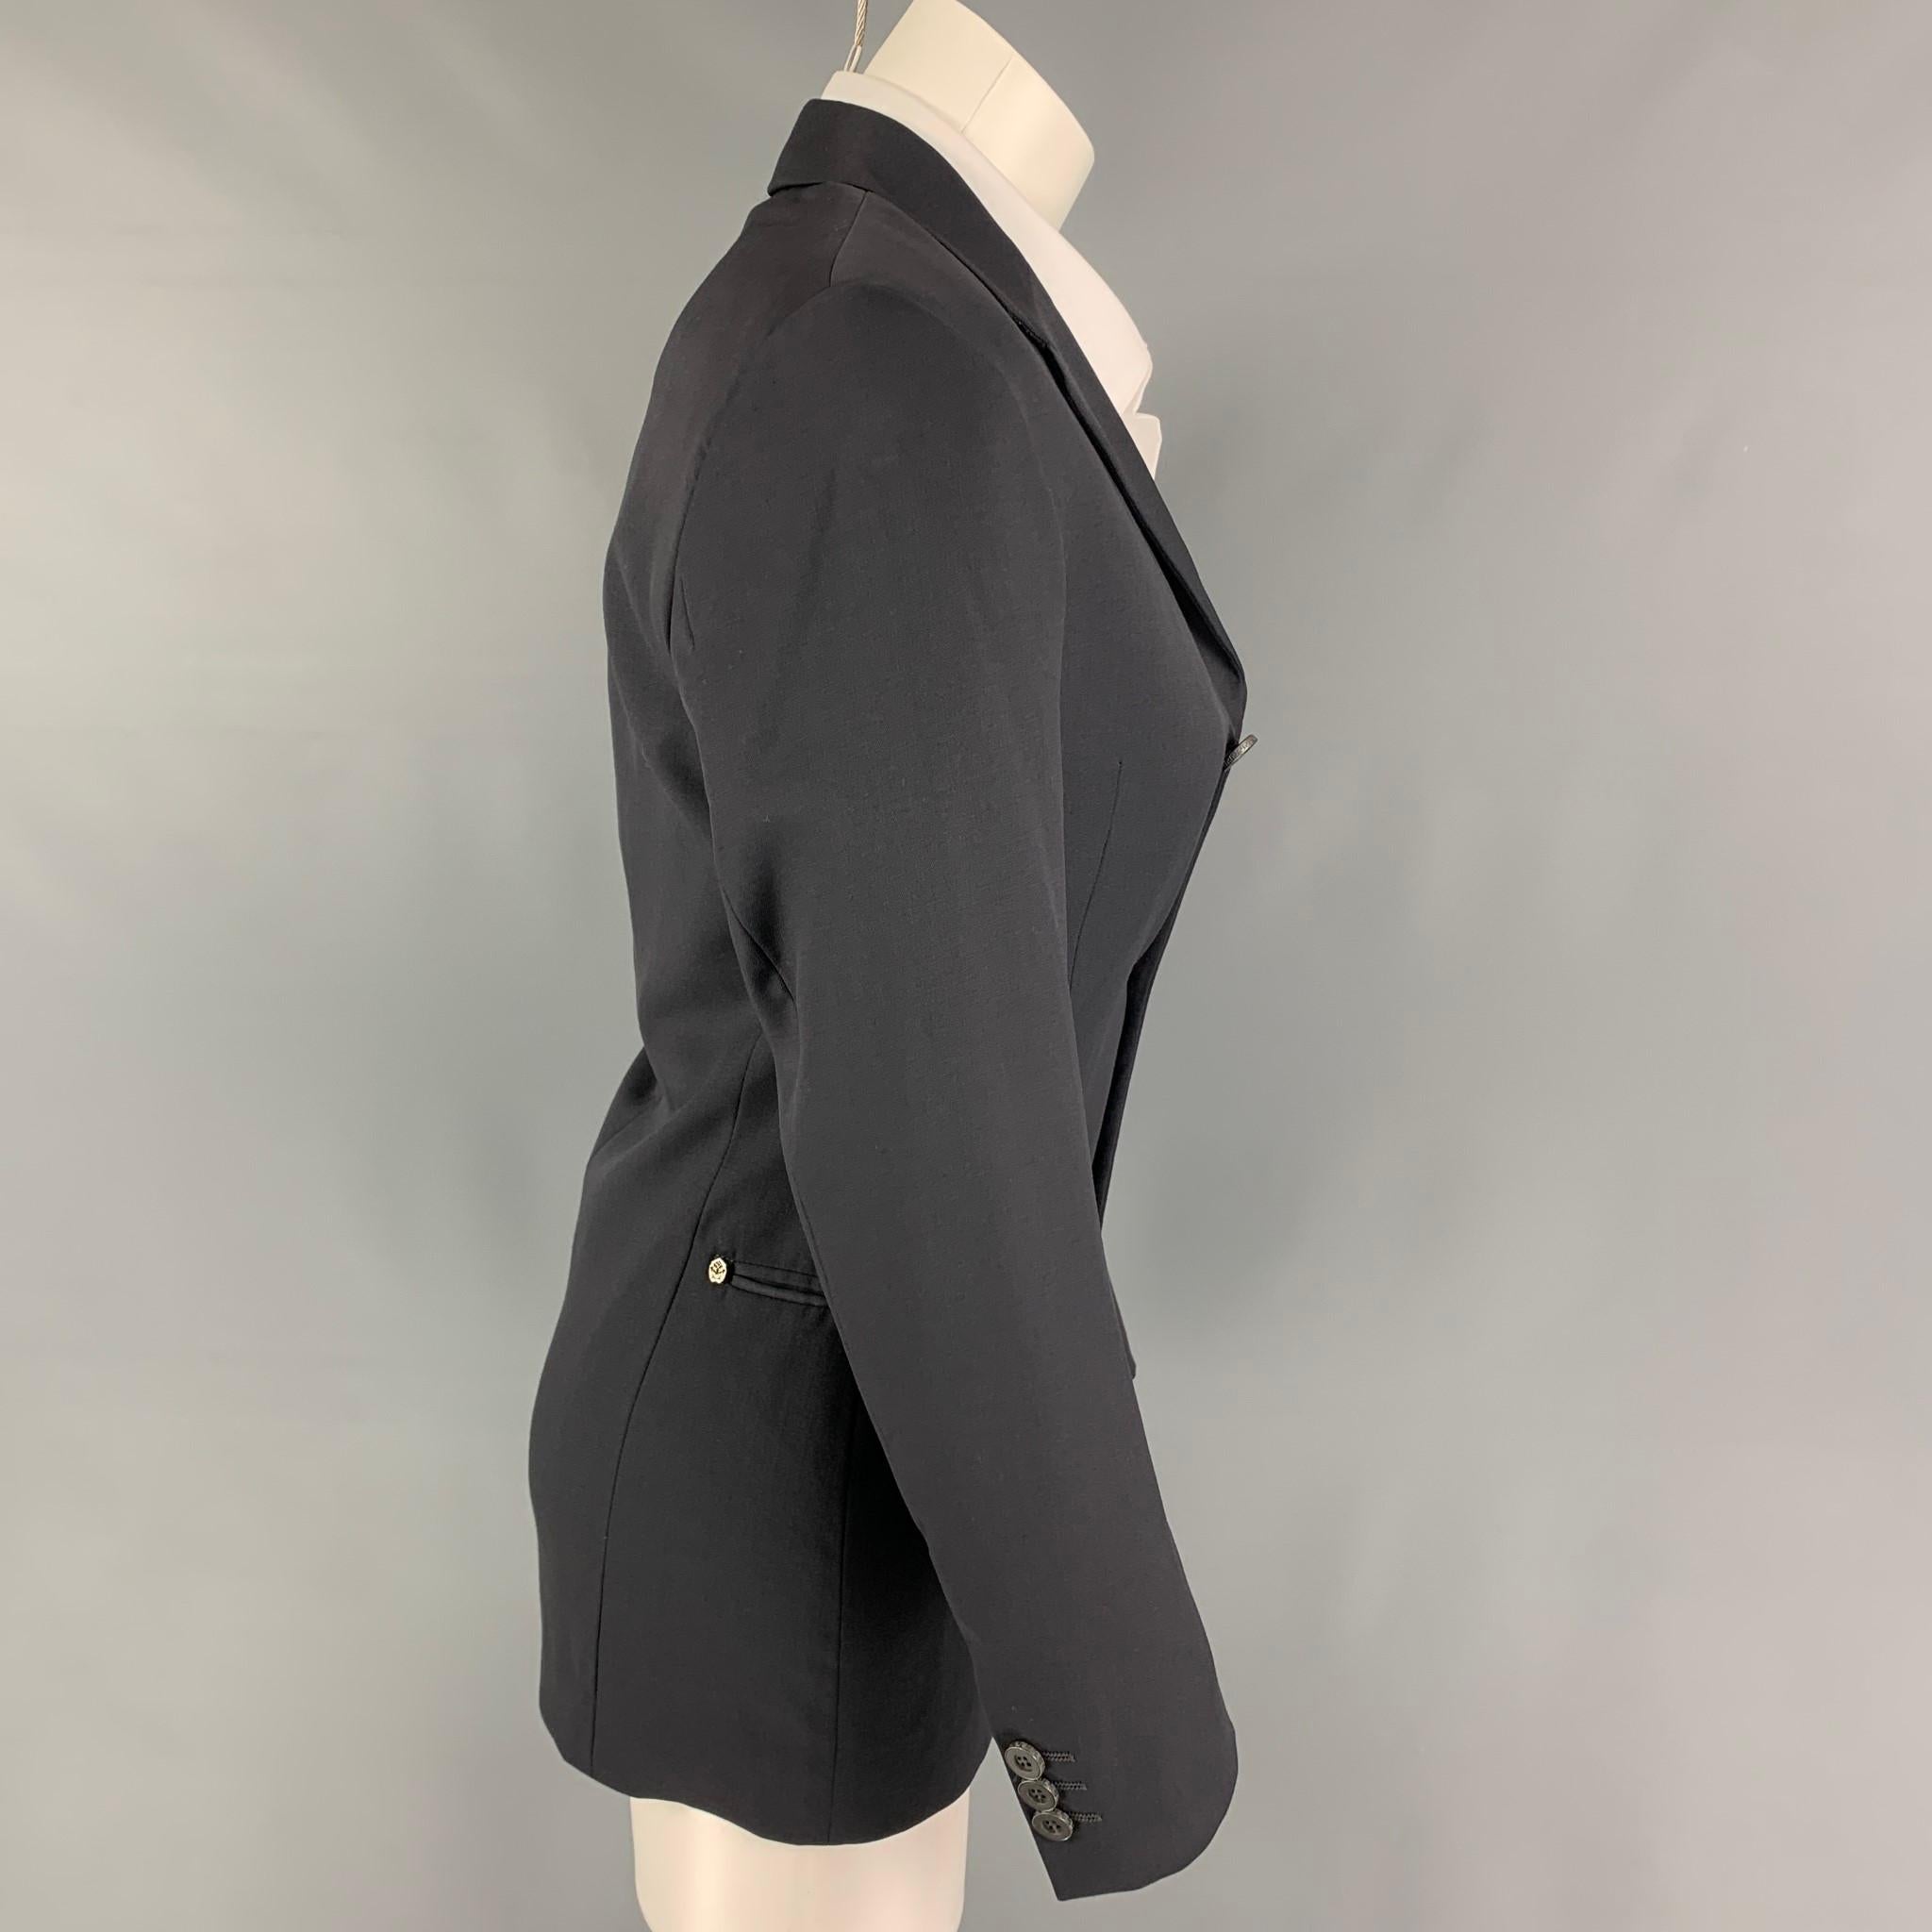 Vintage VERSUS by GIANNI VERSACE sport coat comes in a gray virgin wool with a full liner featuring a notch lapel, slit pockets, shoulder pads, silver tone hardware, and a three button closure. Made in Italy. 

Excellent Pre-Owned Condition.
Marked: